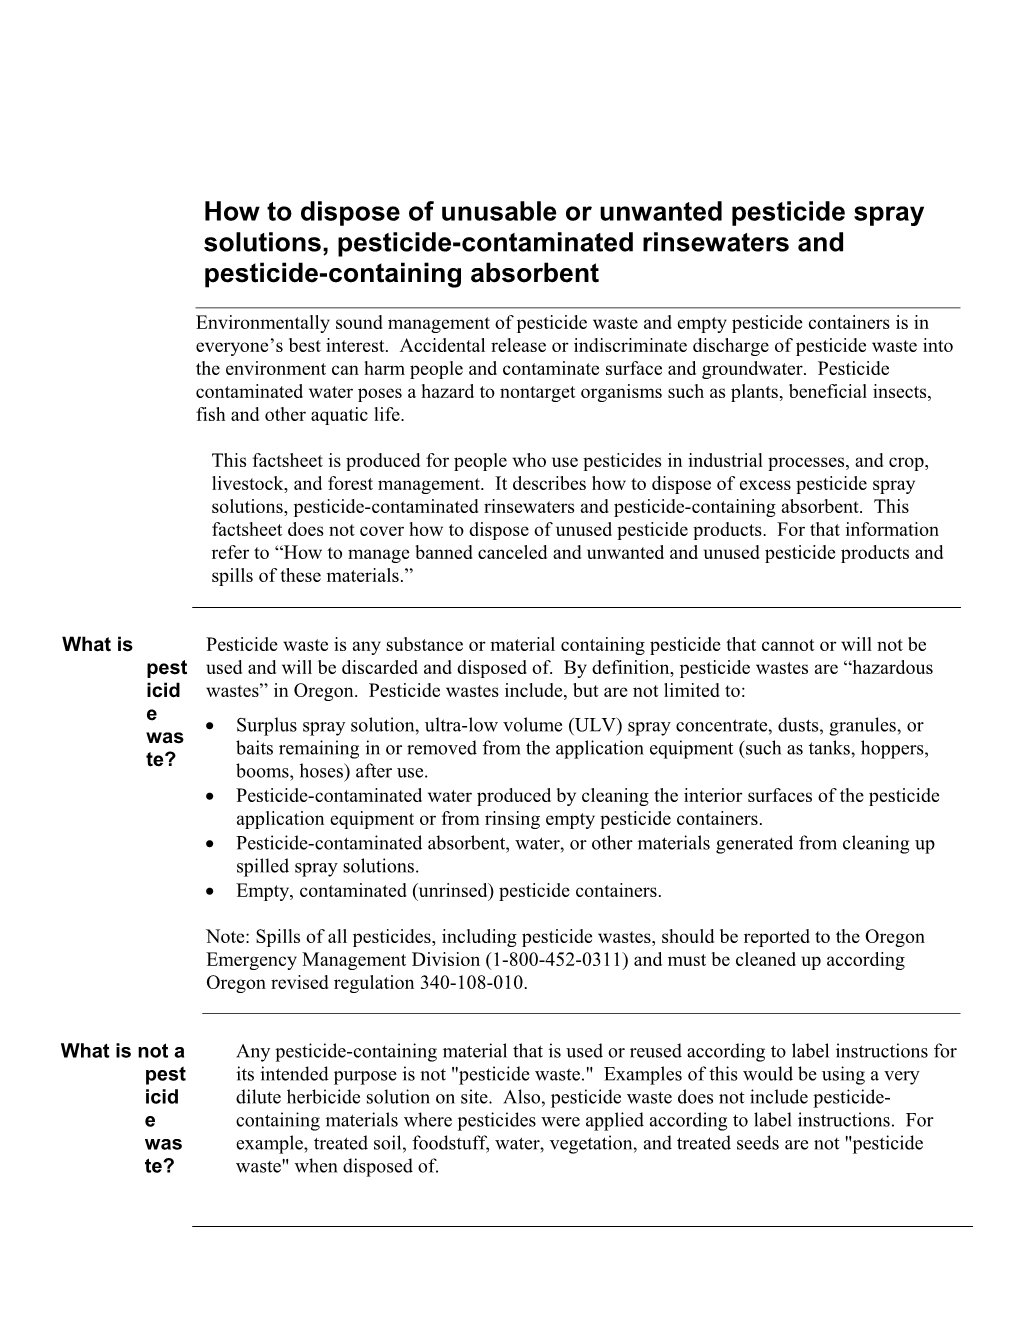 How to Dispose of Pesticide Wastes